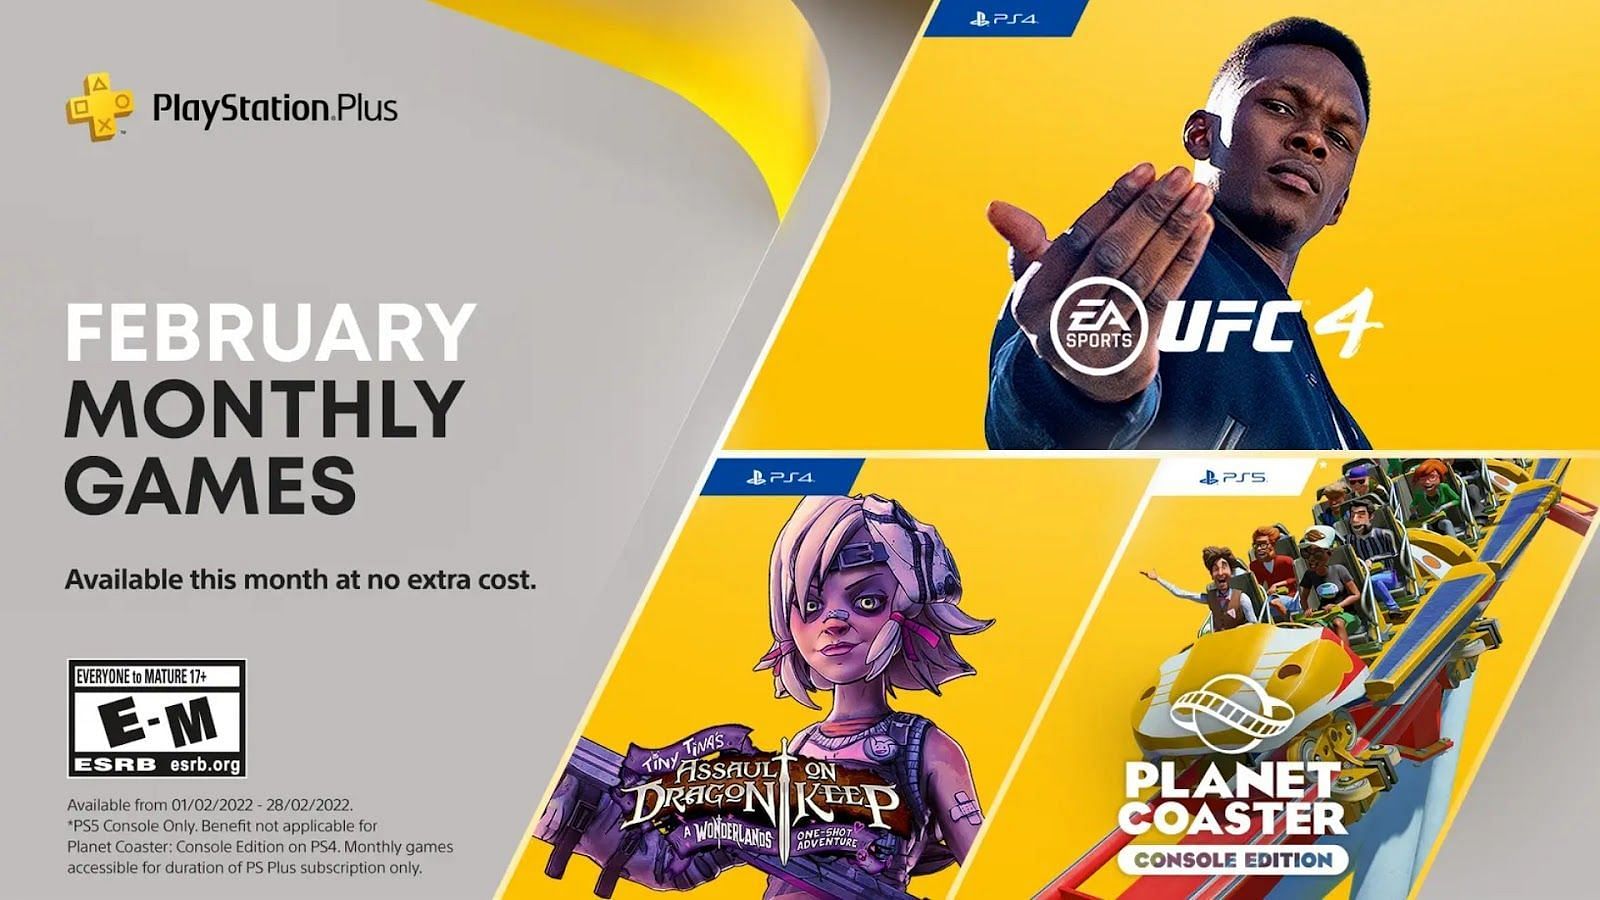 PlayStation Plus free games for March 2022 announced